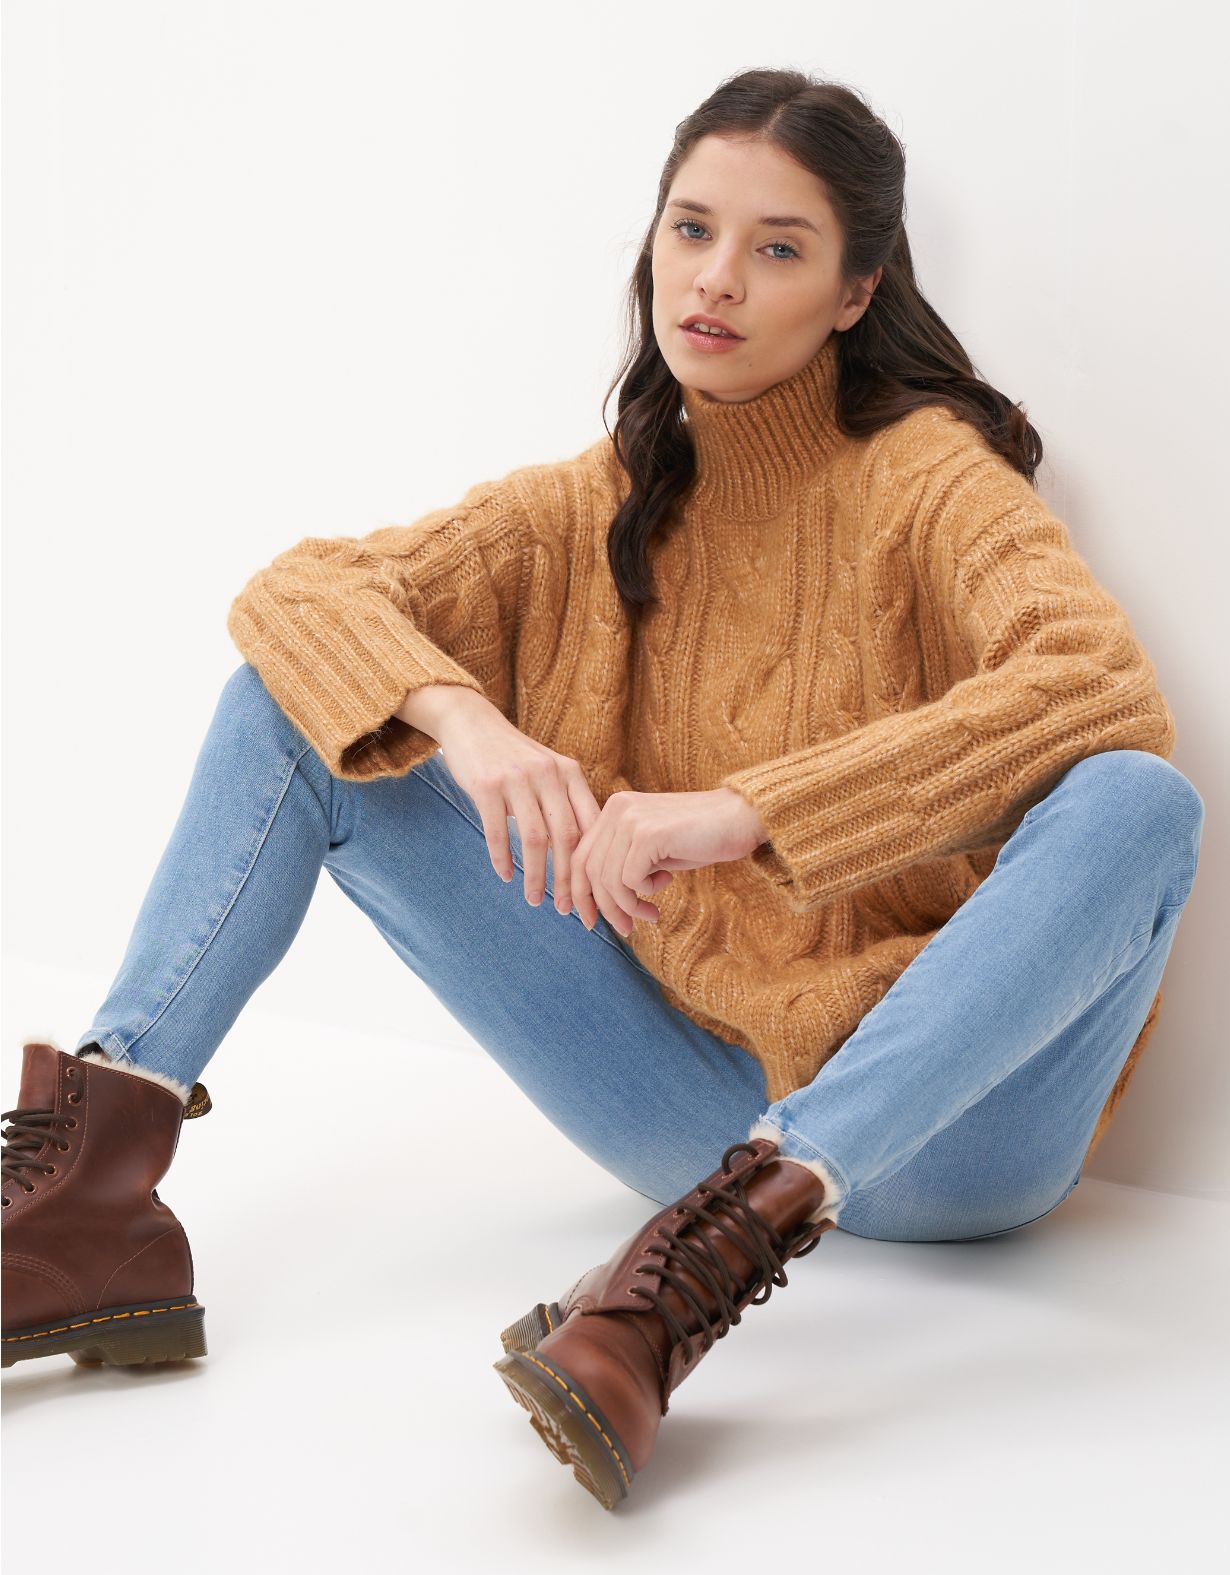 AE Cable Knit Mock Neck Sweater